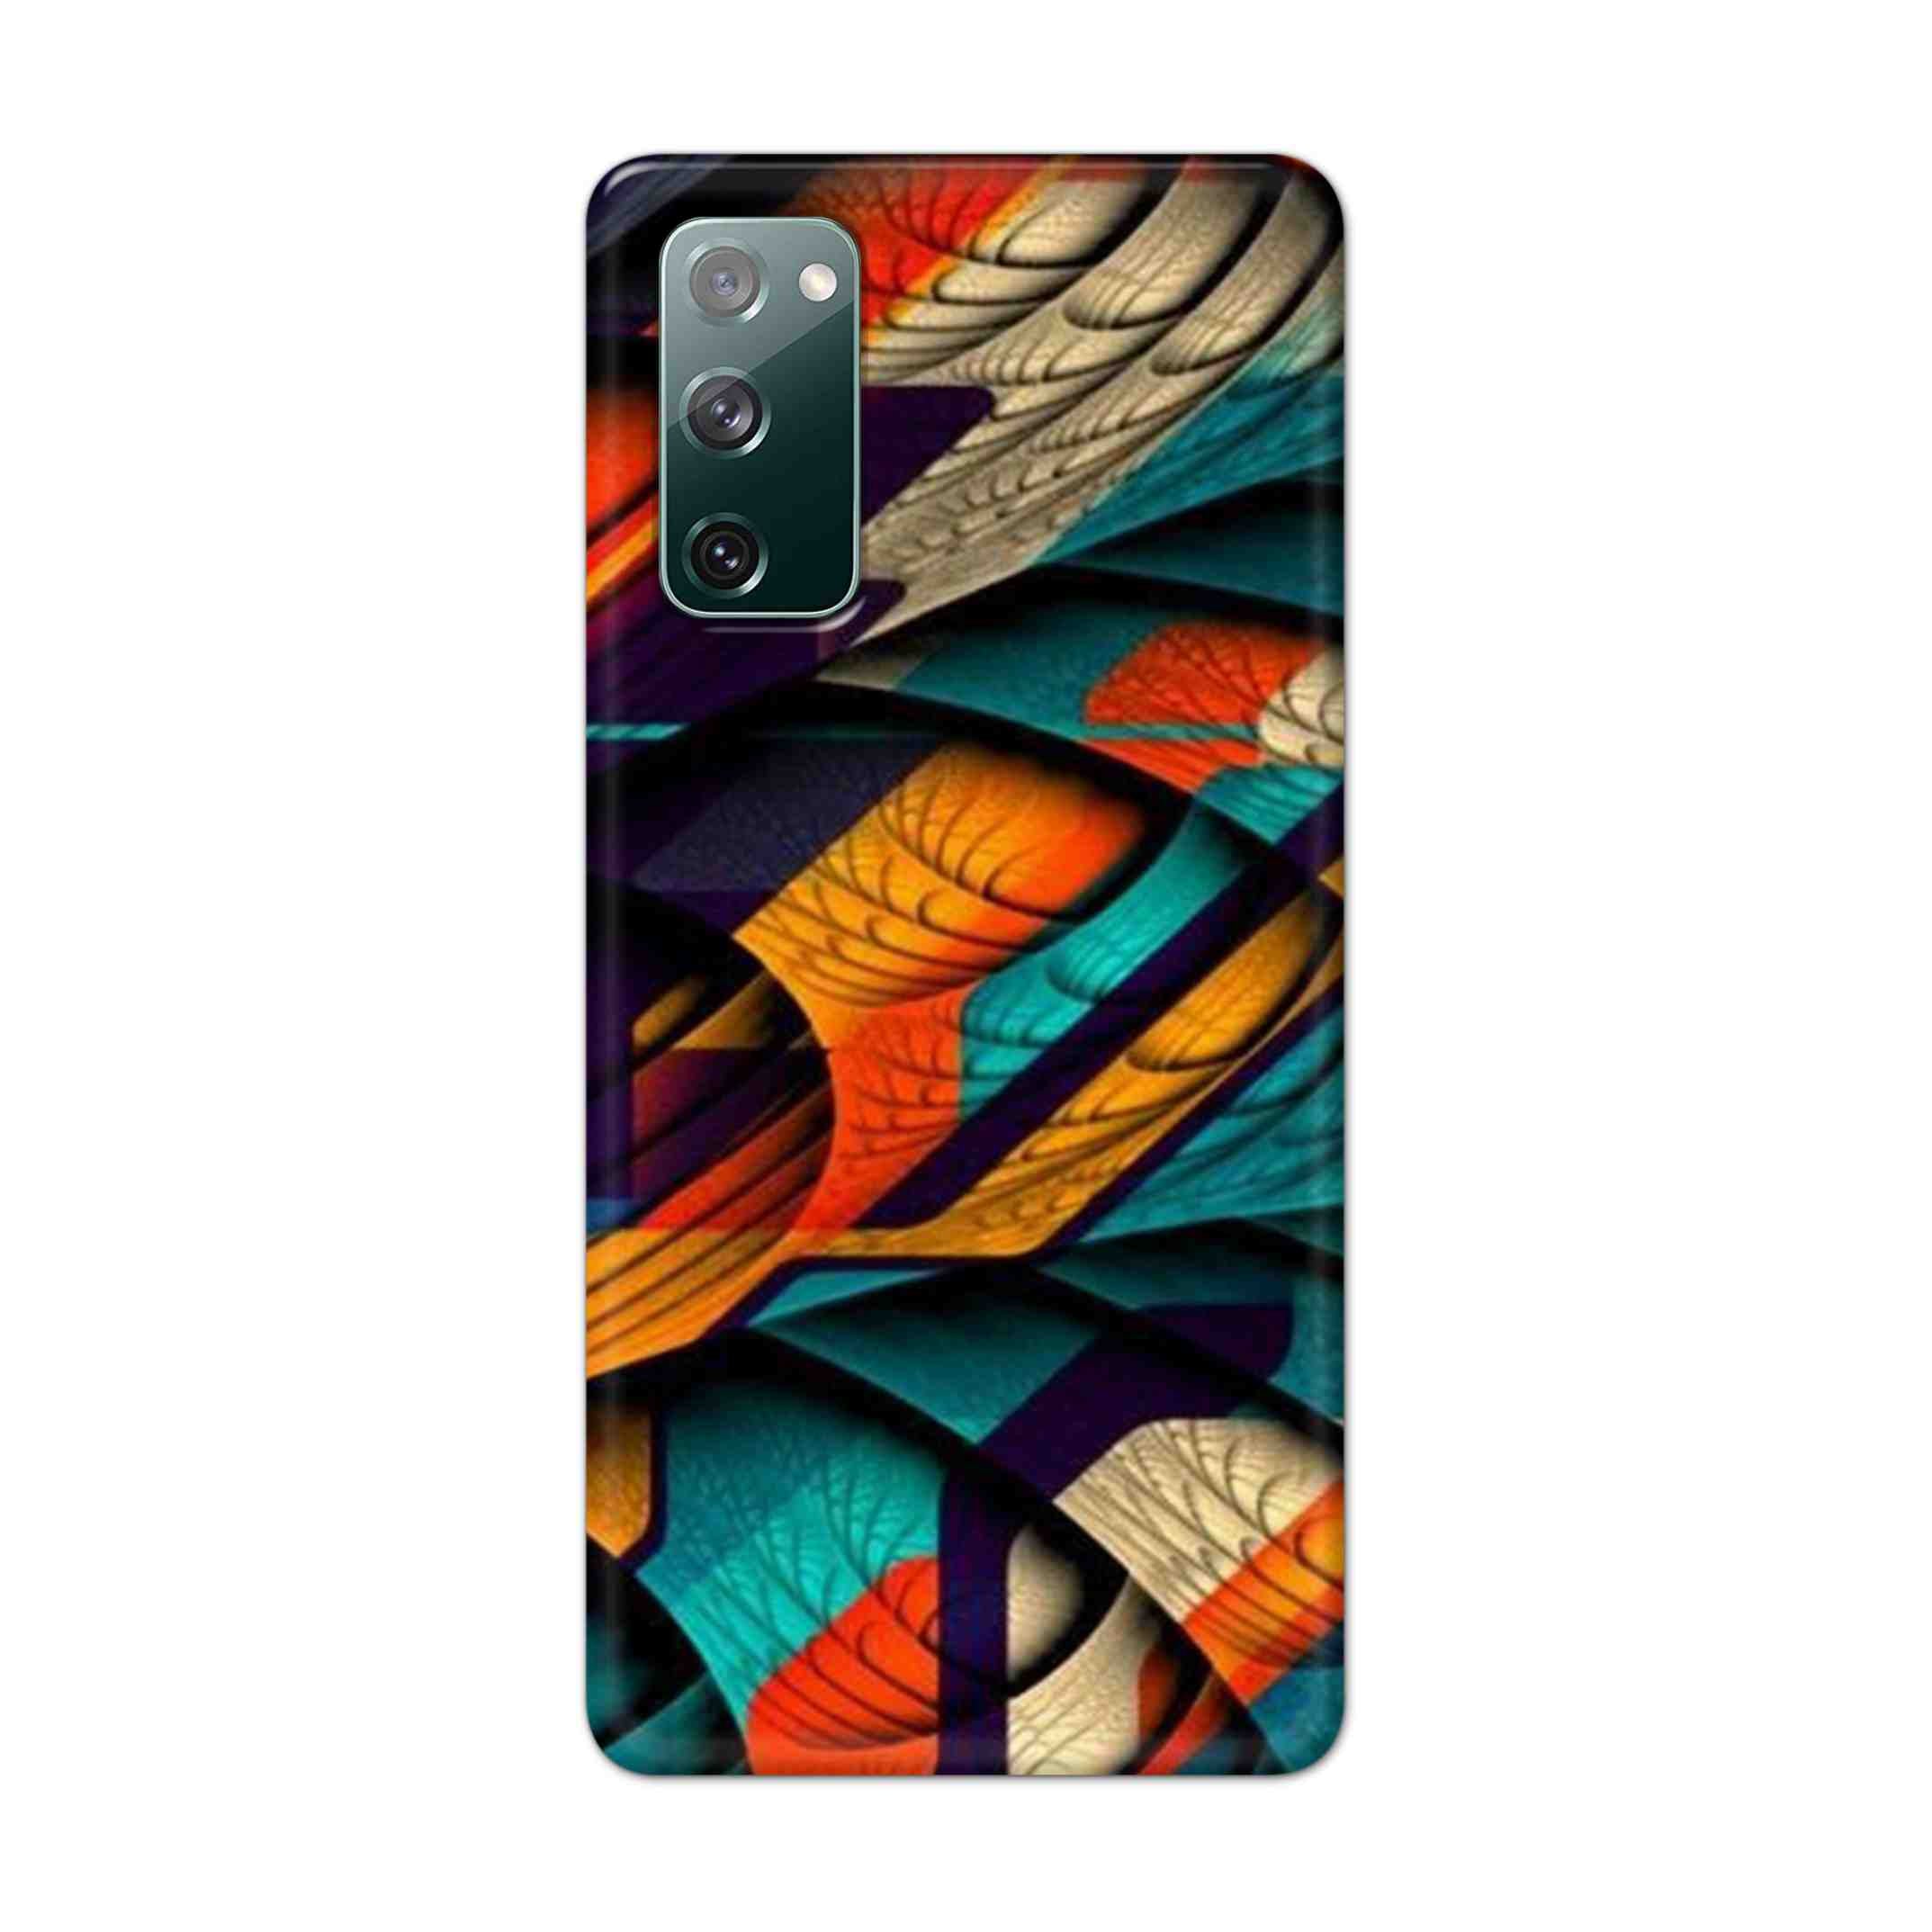 Buy Colour Abstract Hard Back Mobile Phone Case Cover For Samsung Galaxy S20 FE Online